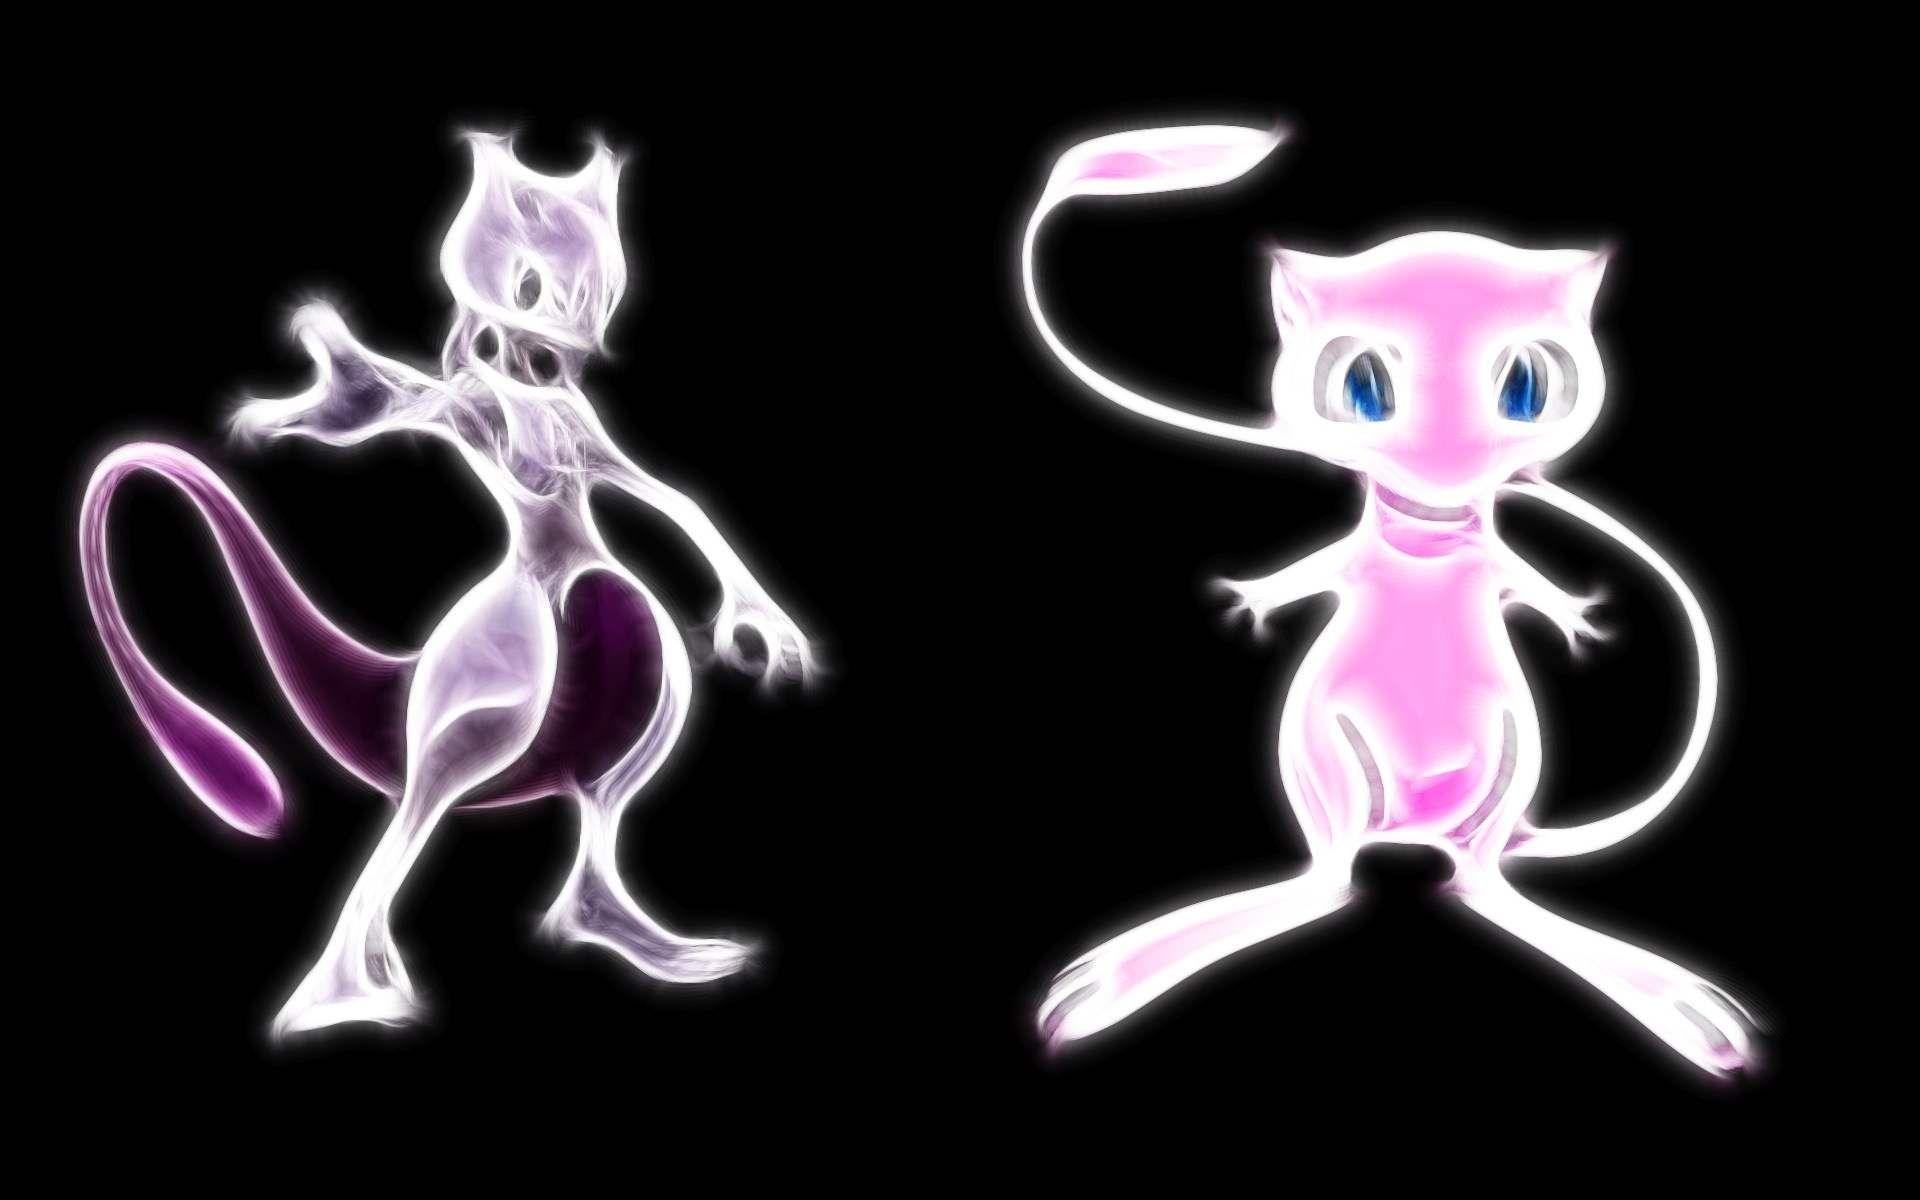 Mew and Mewtwo Wallpaper